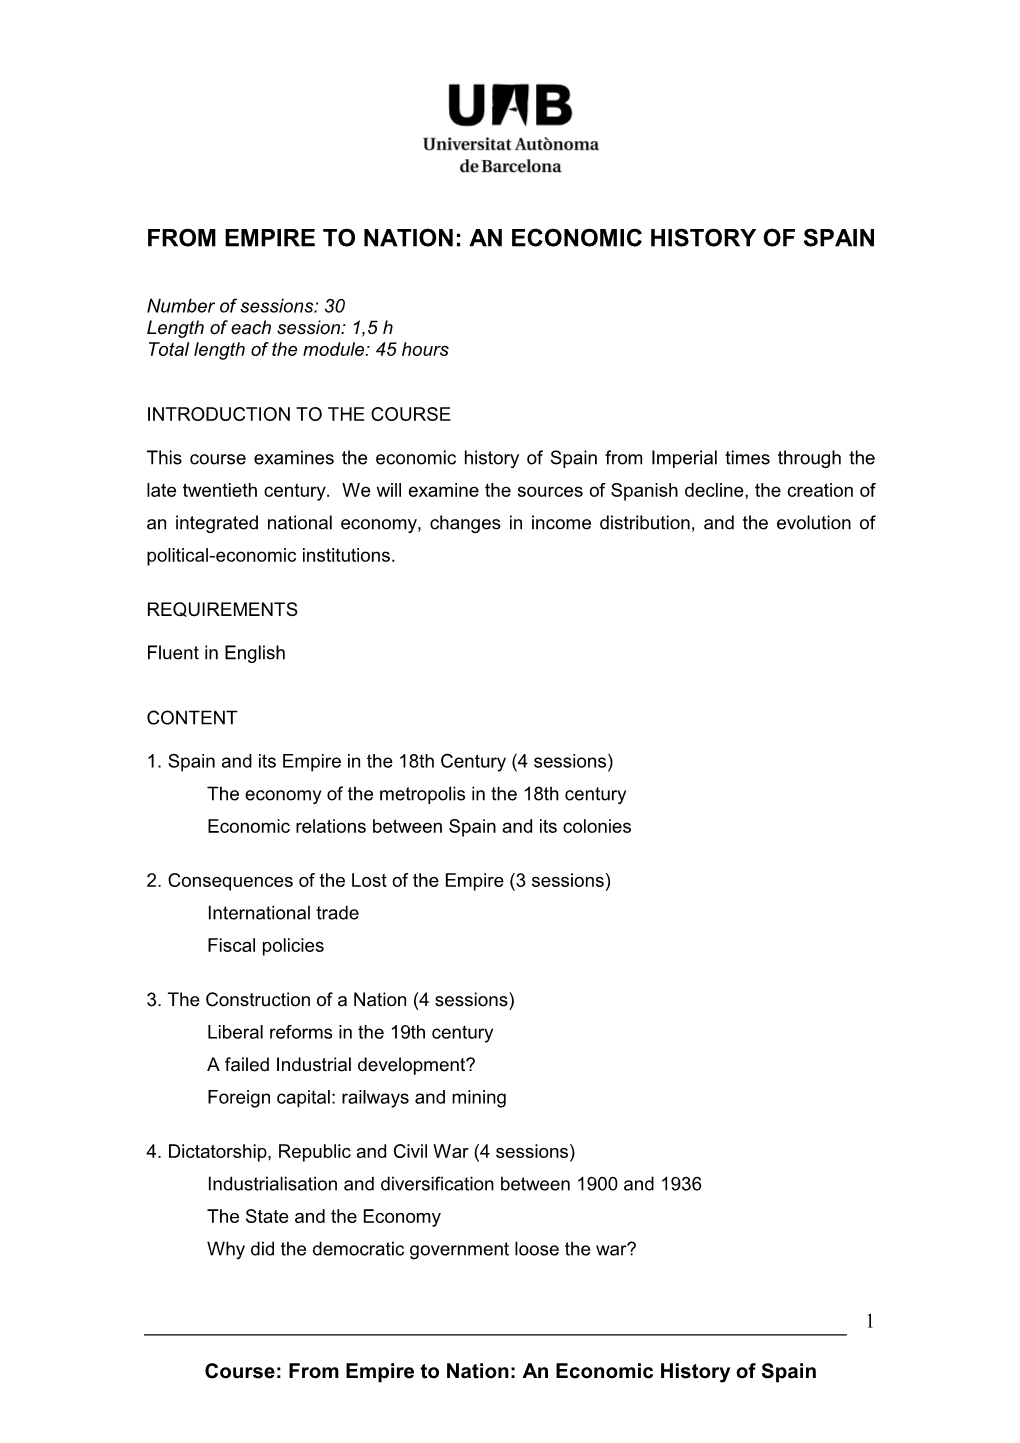 From Empire to Nation an Economic History of Spain